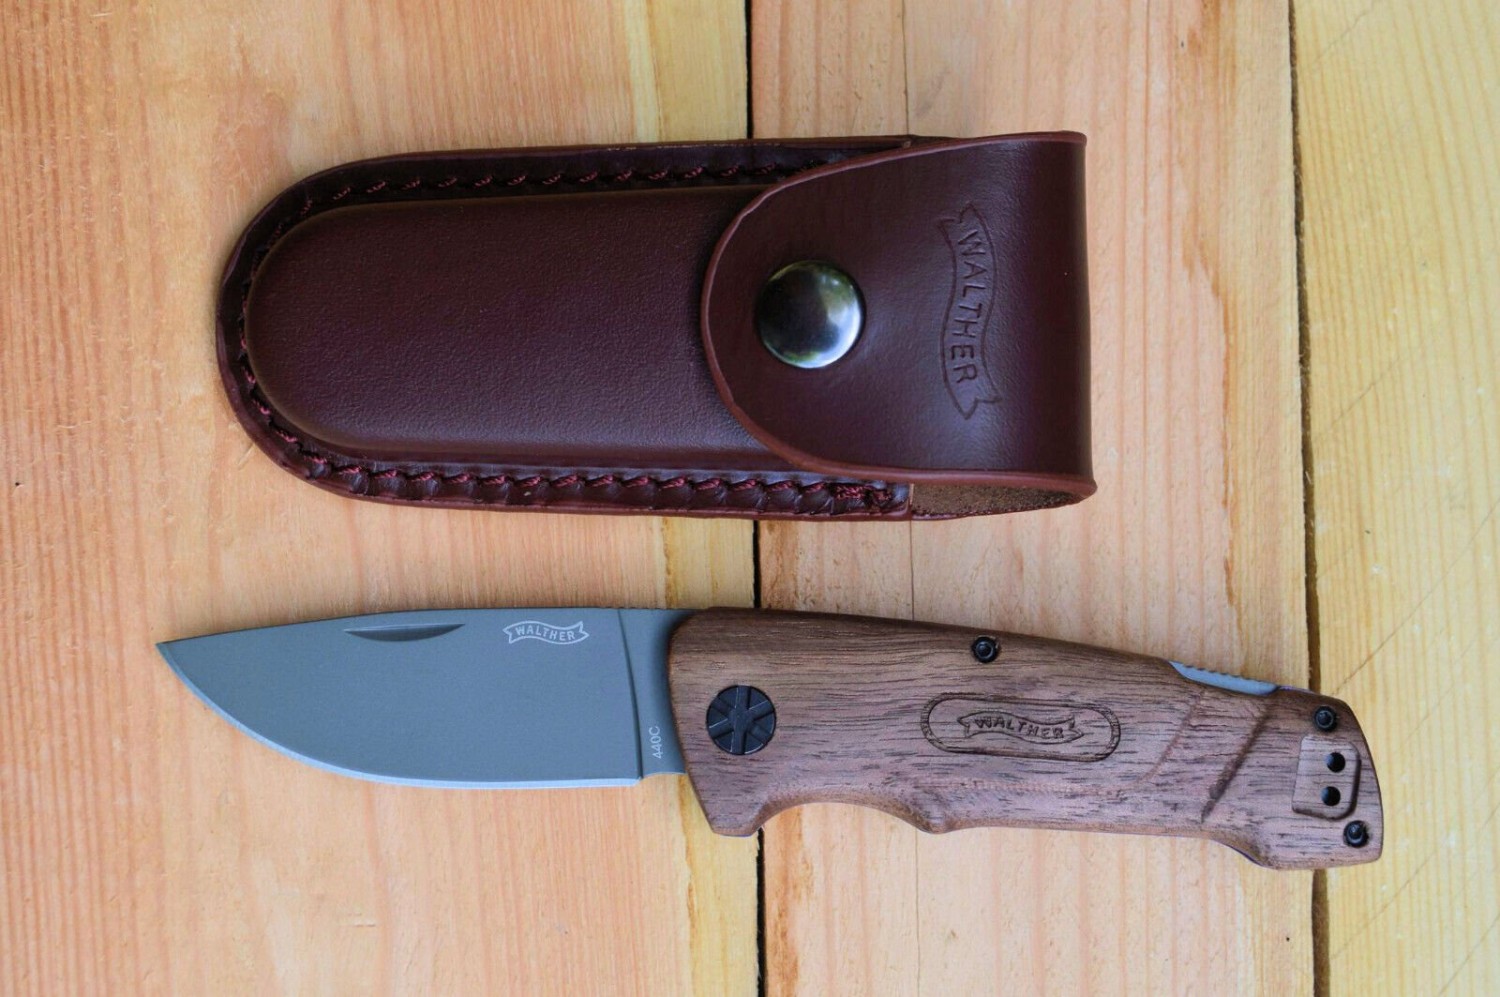 Walther BWK 7 Blue Wood Knife two-hand knife